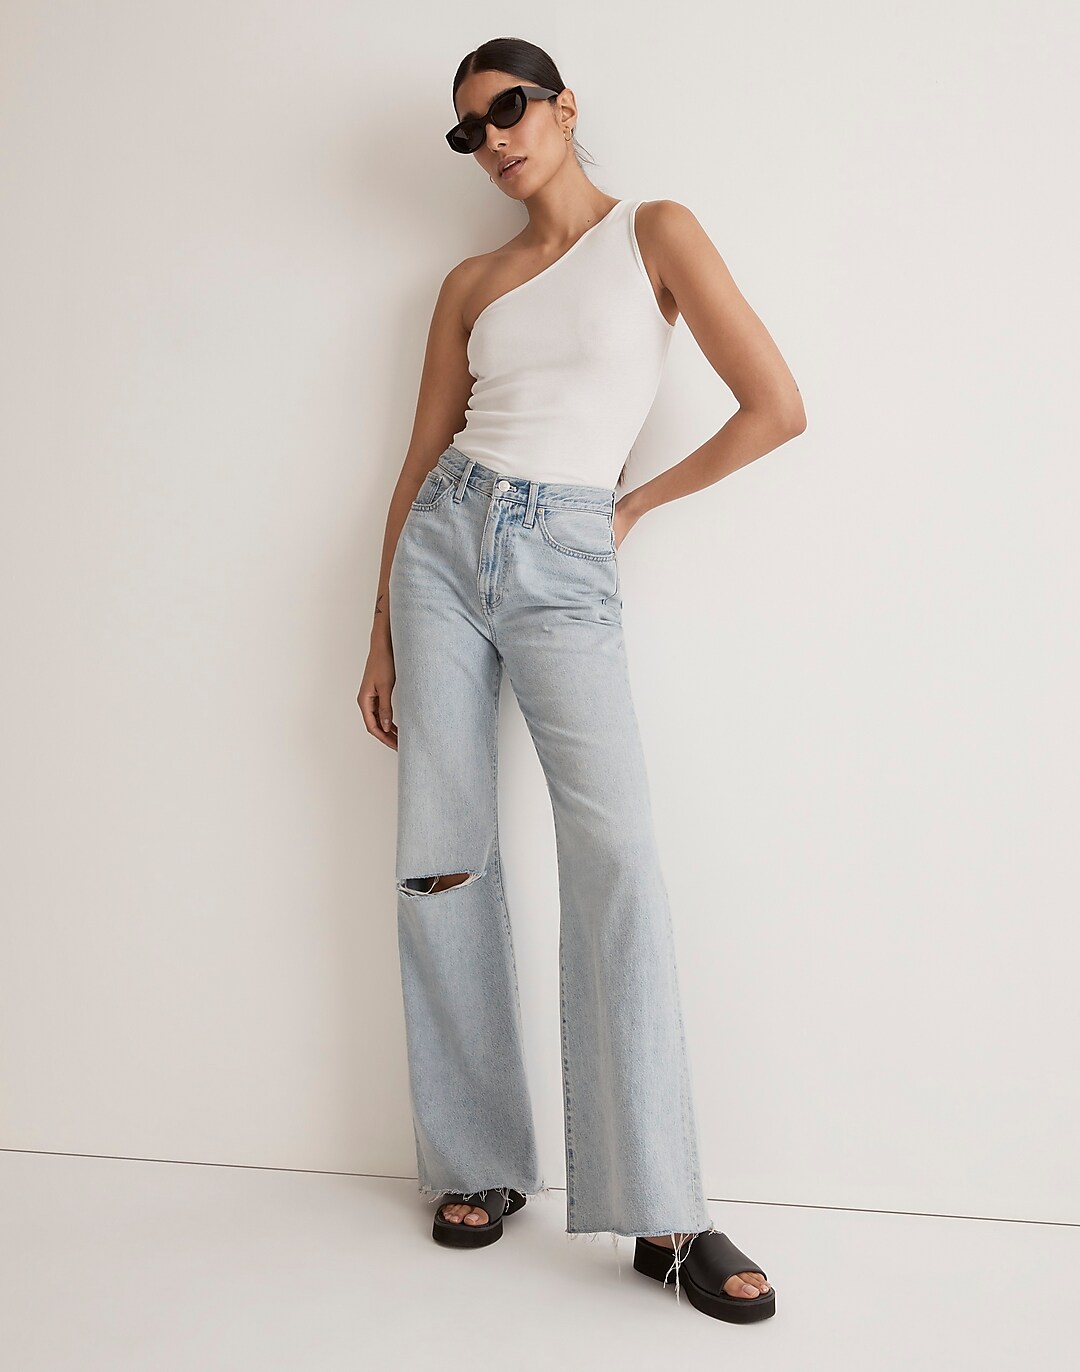 Baggy Flare Jeans in Luzon Wash: Knee-Slit Edition